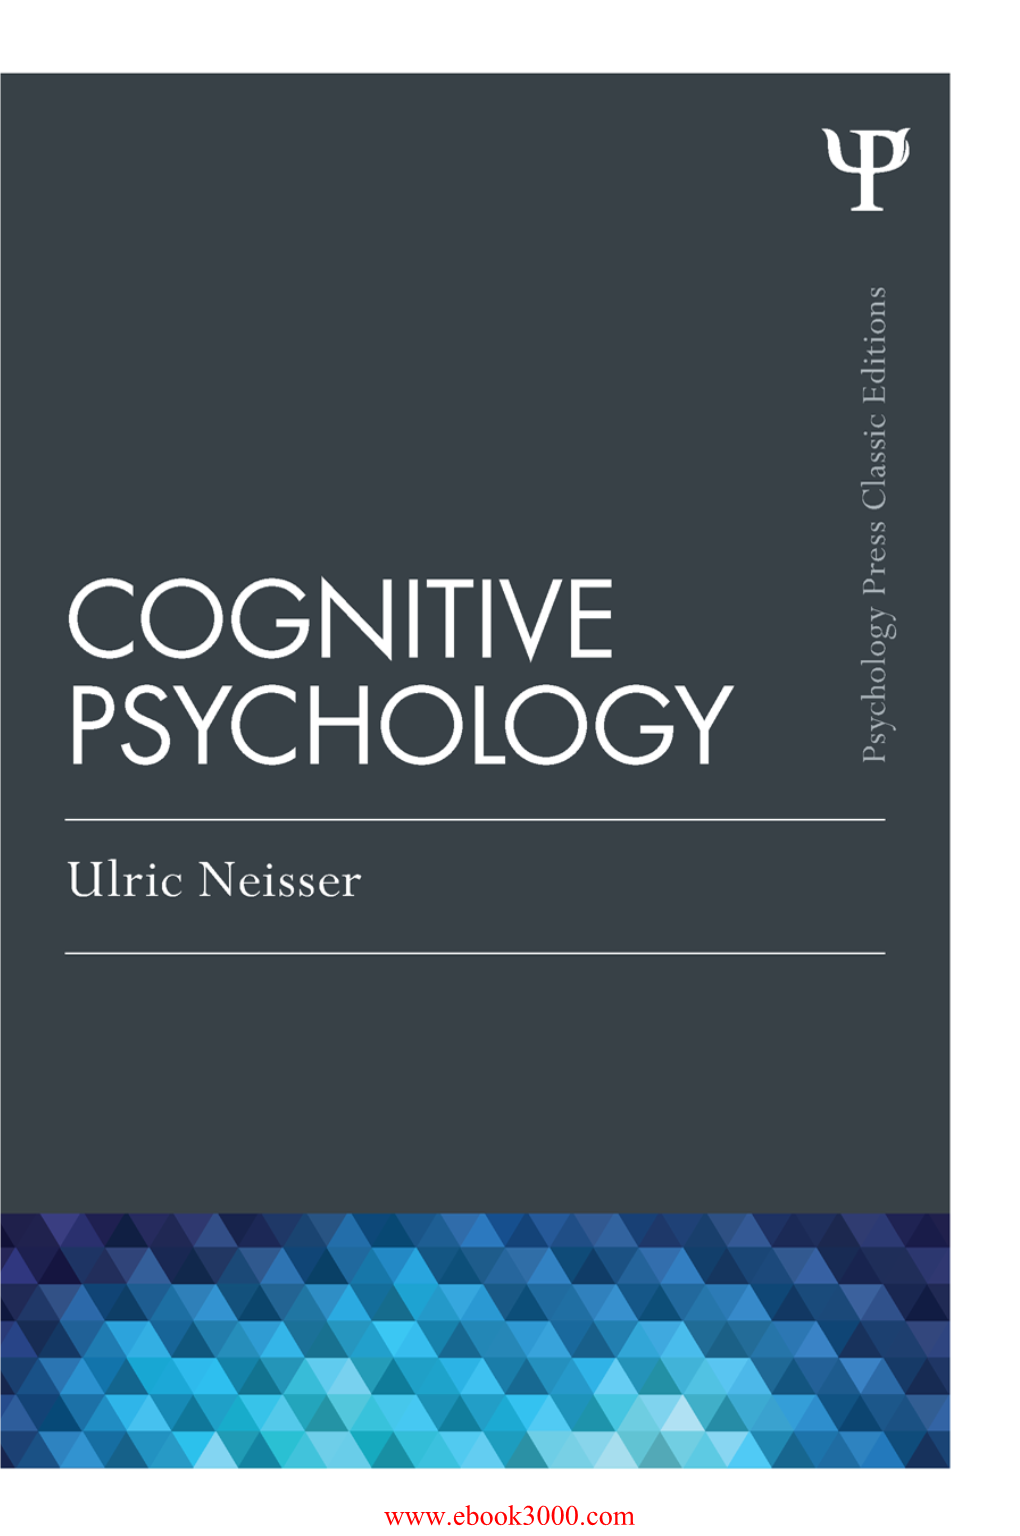 Cognitive Psychology by Ulric Neisser